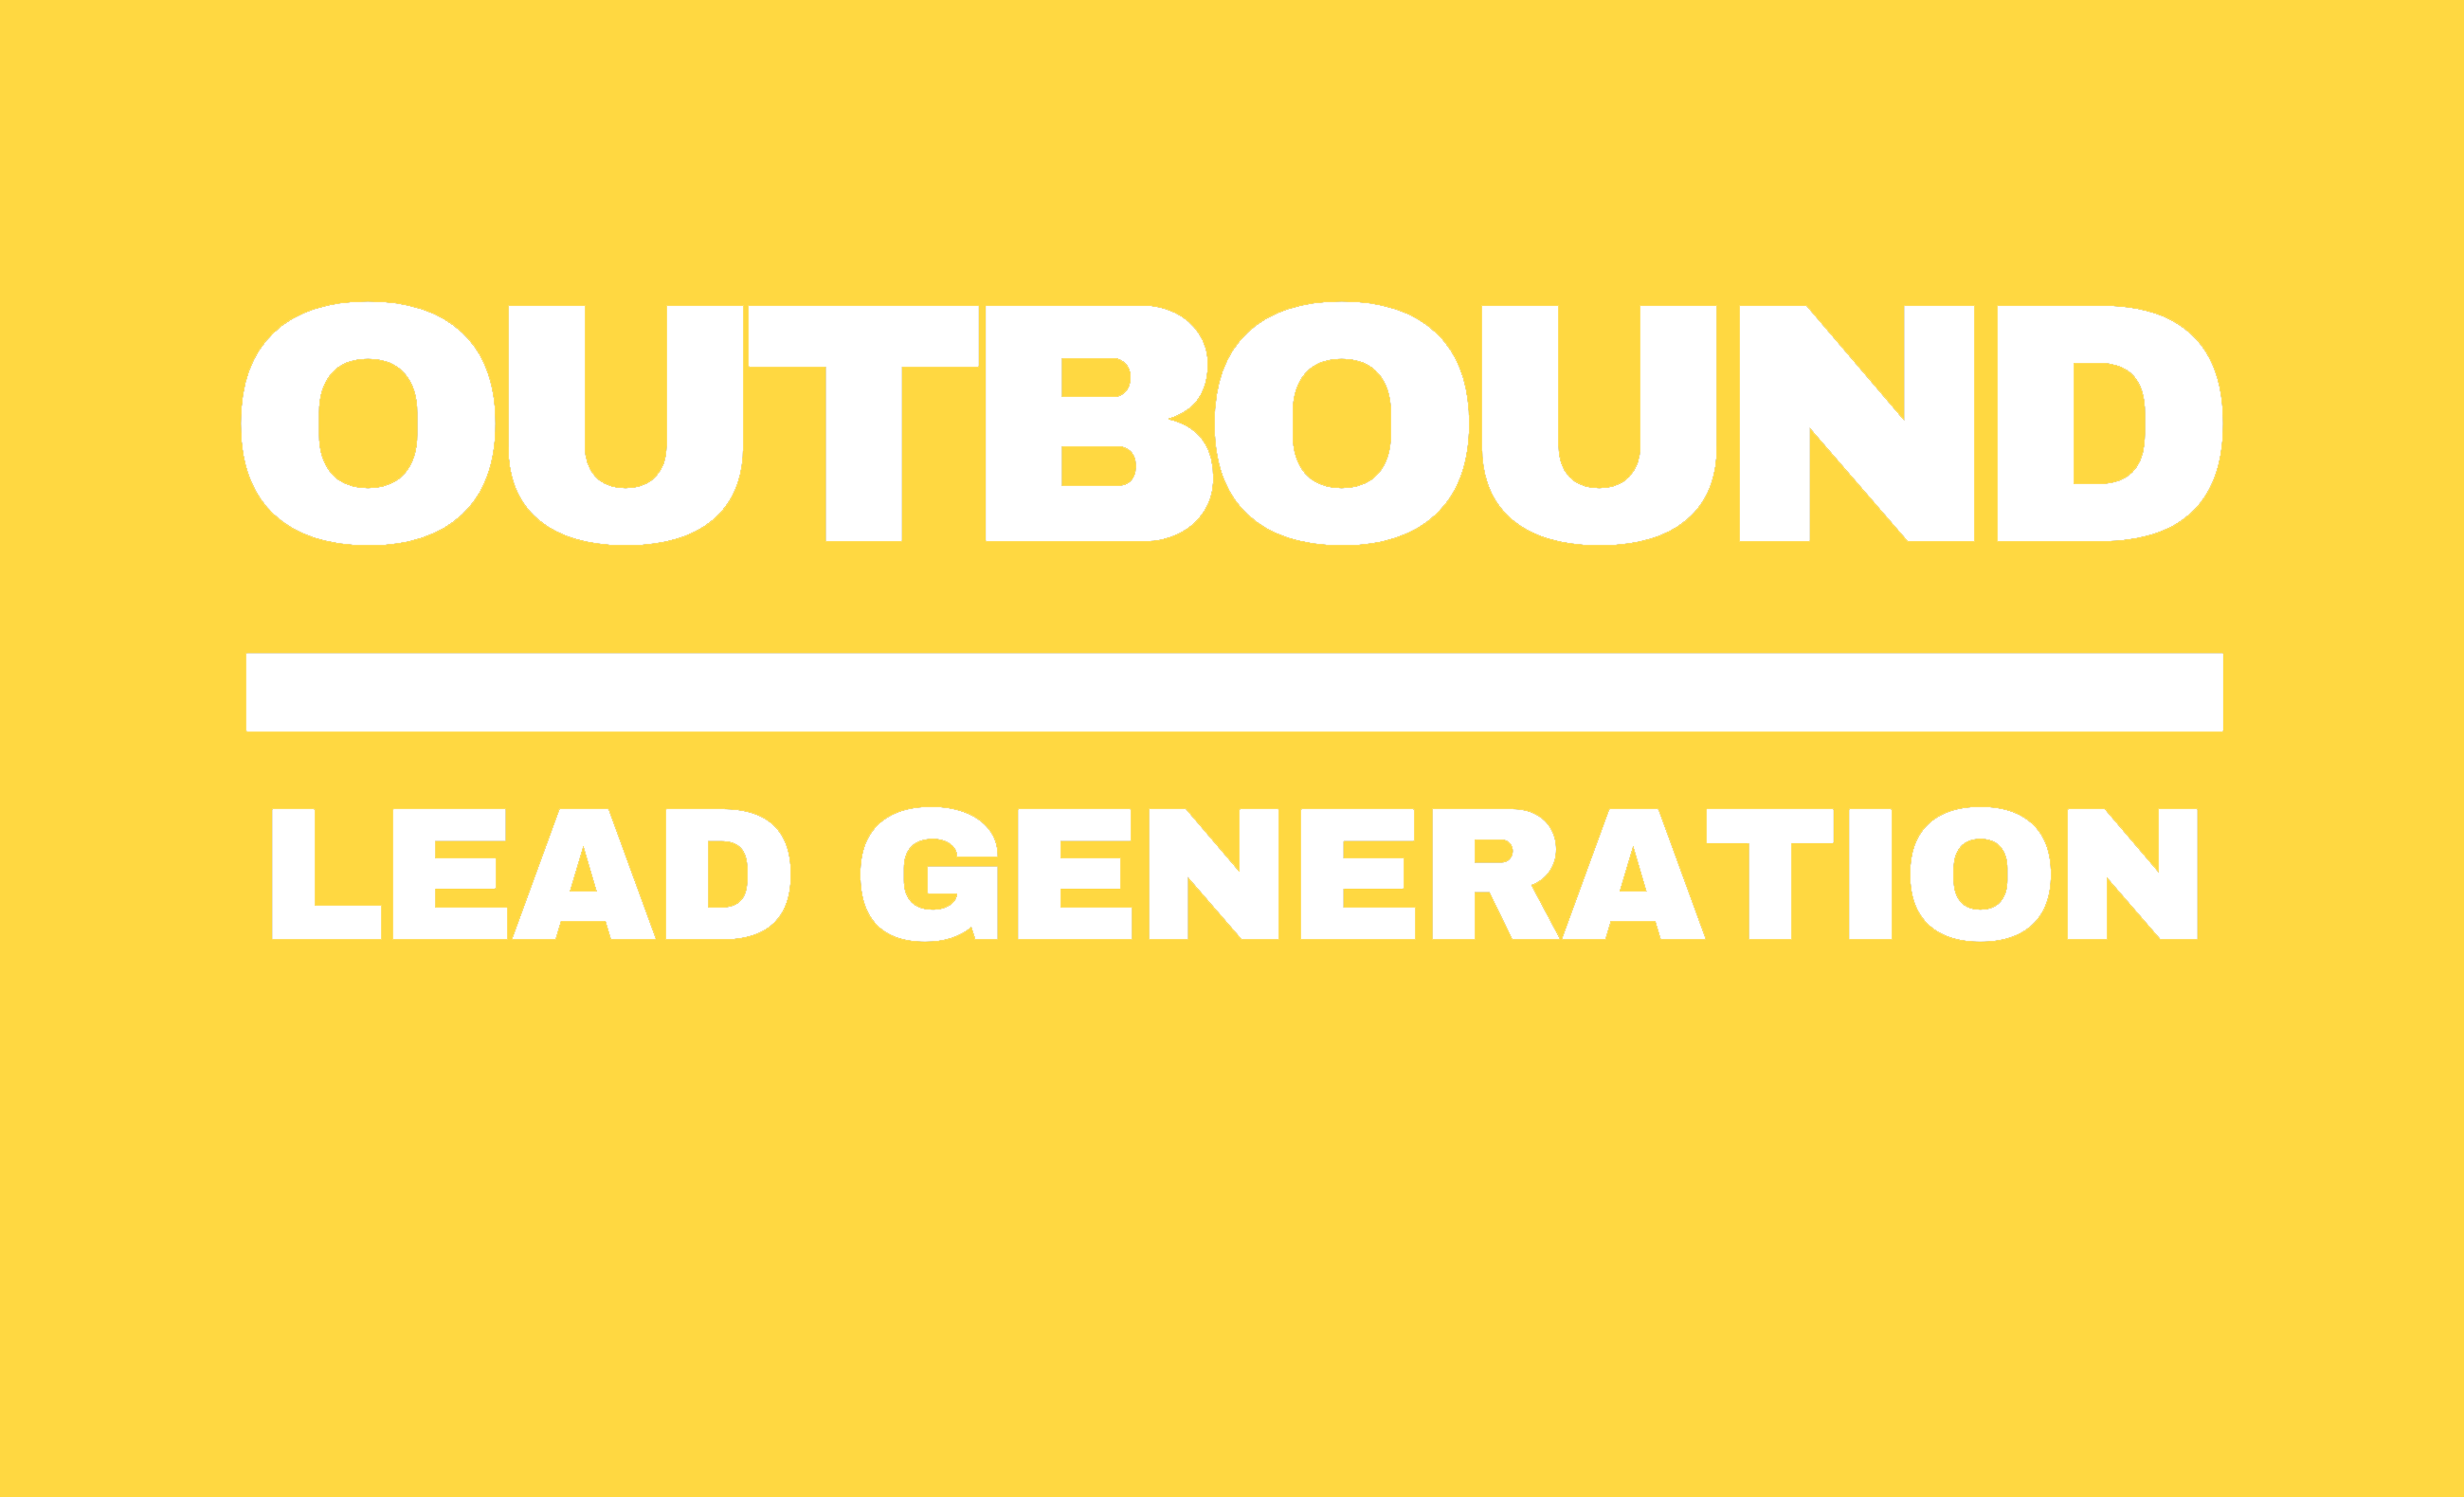 Outbound Lead Generation